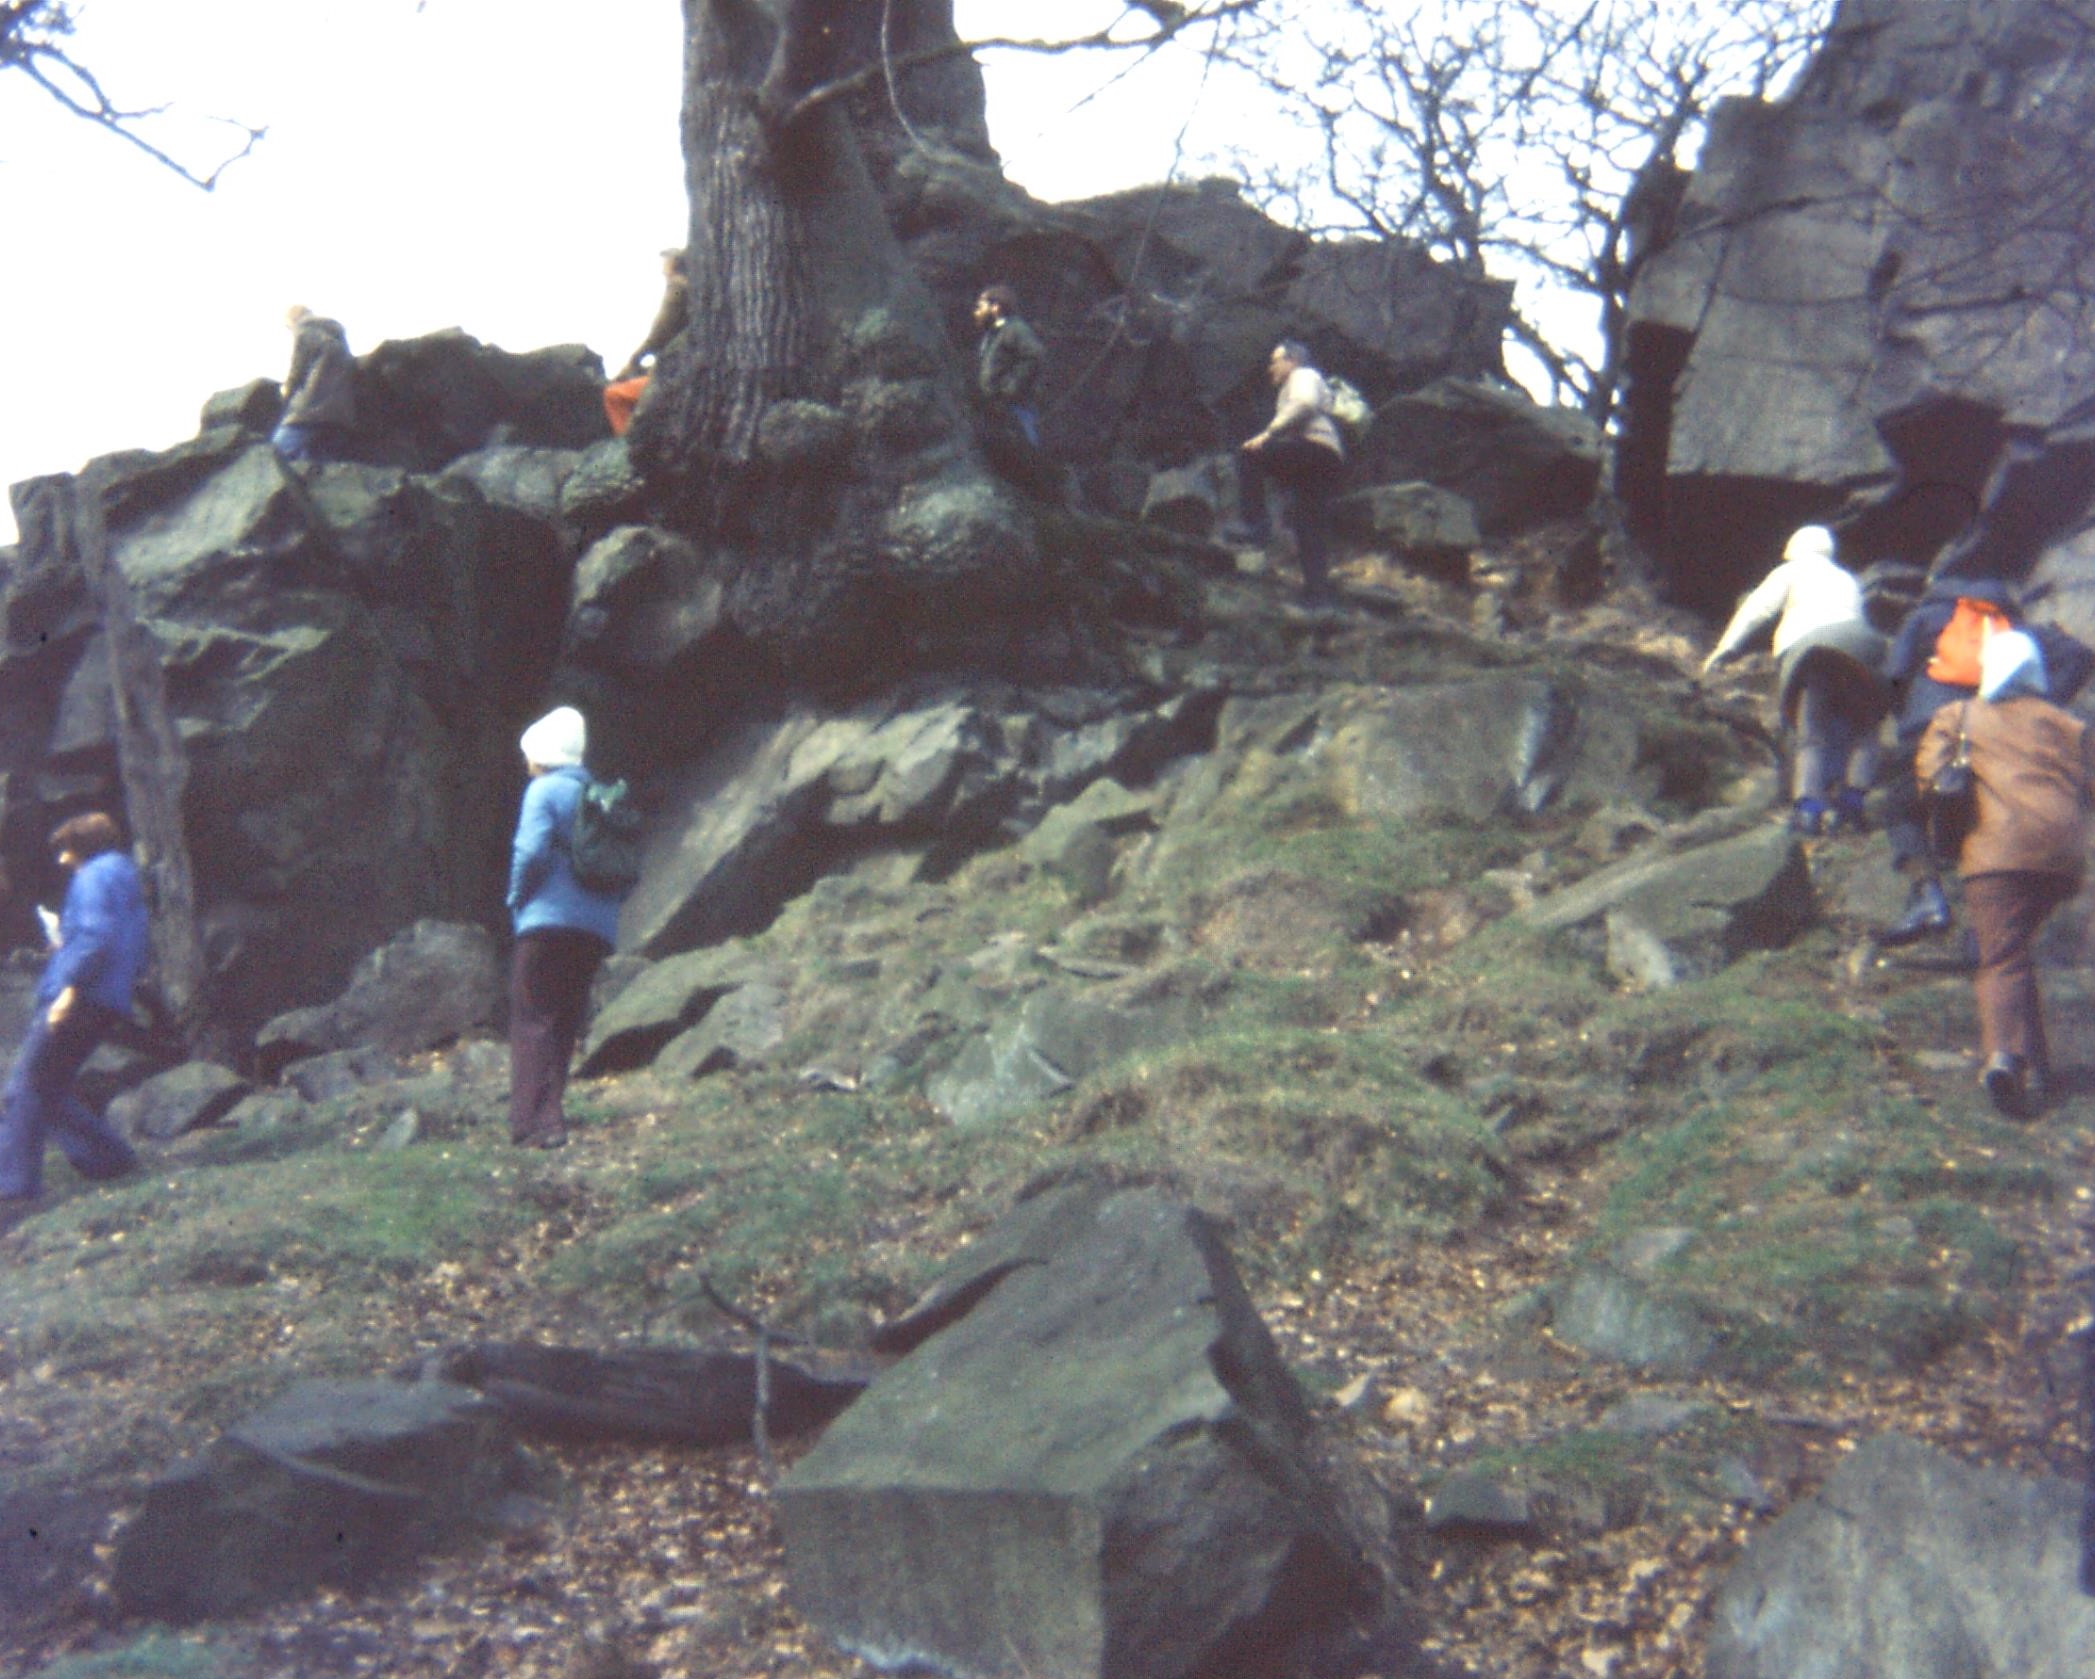 1976.04.03 Charnwood Forest13. Bradgate Pk. S. Charnwood Diorite